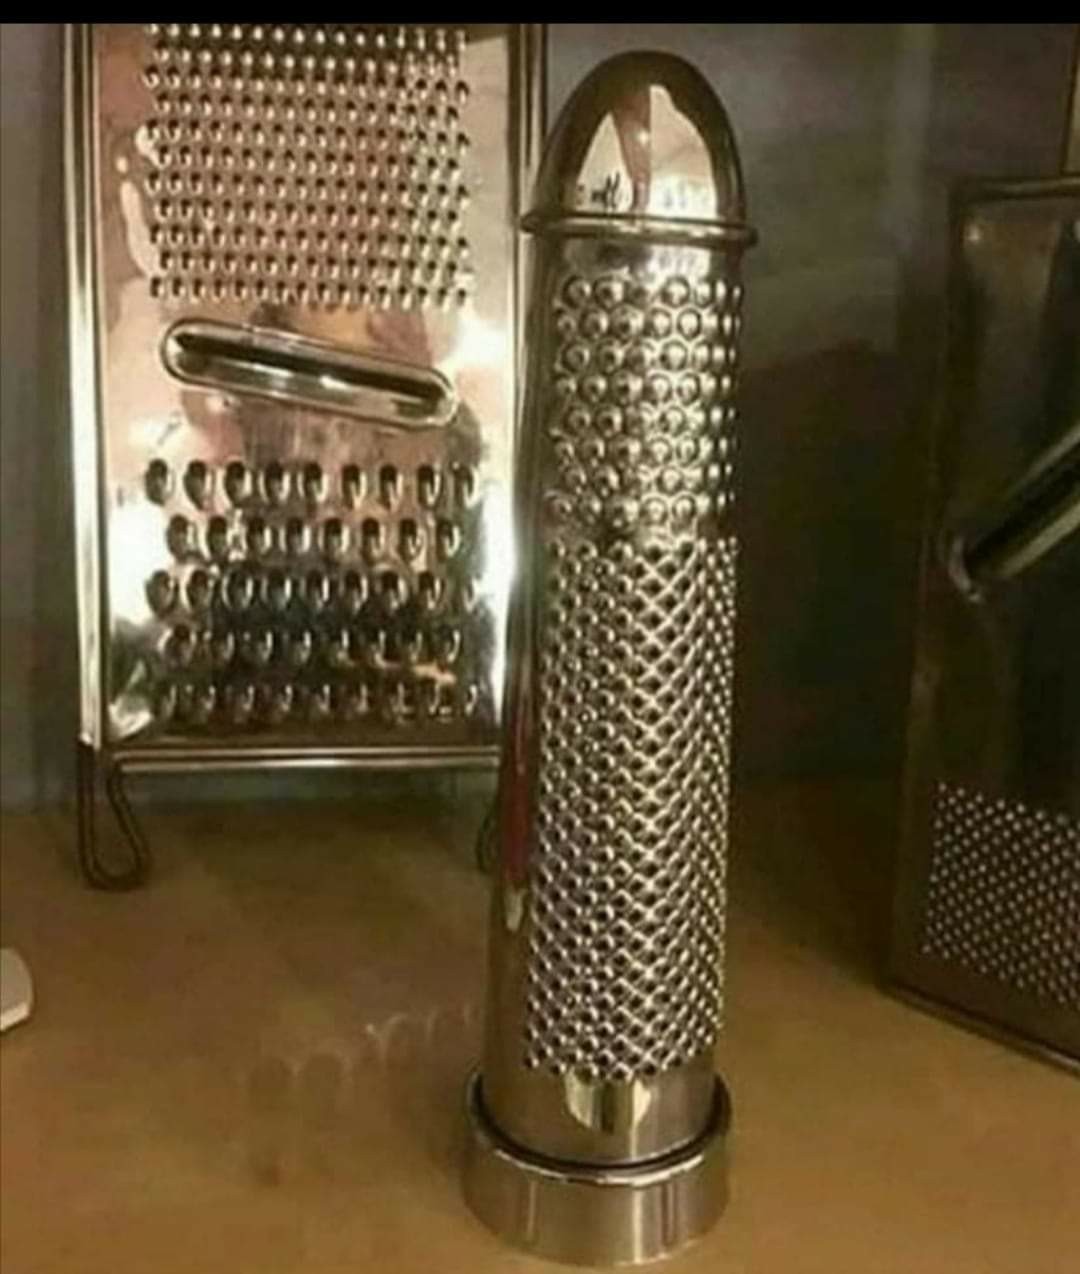 Everything is a cheese grater of you're brave enough - meme